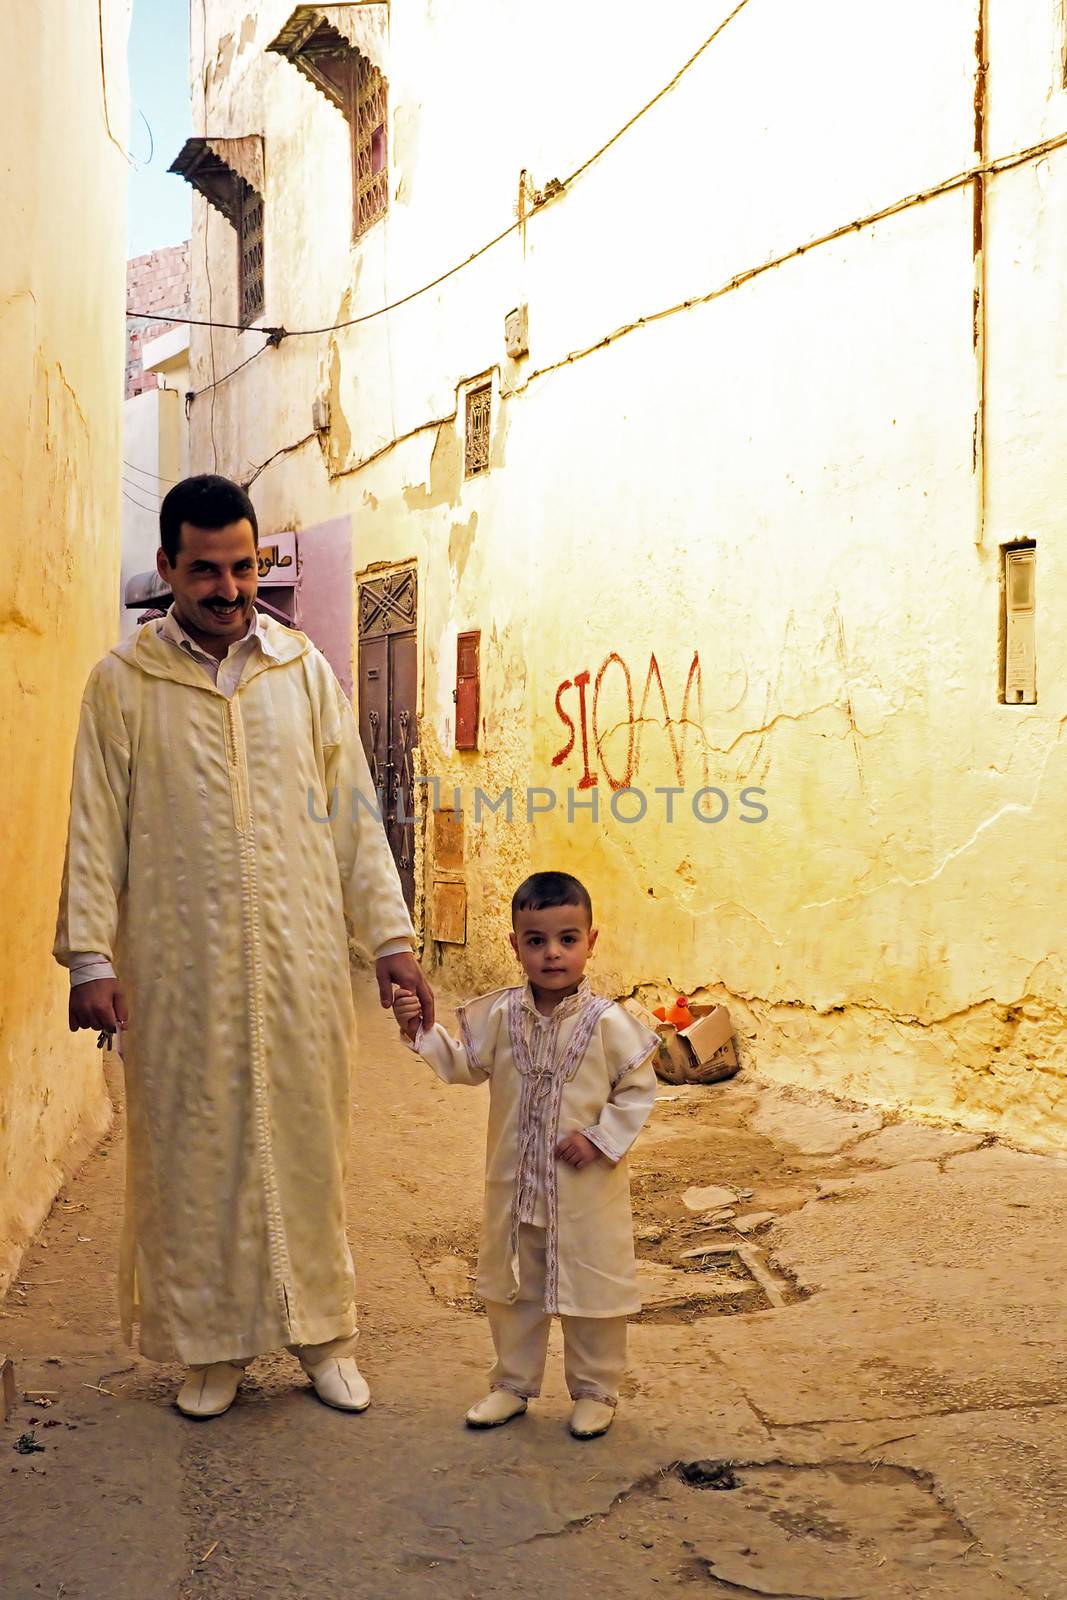 FES, MAROCCO - October 15 2013 : Father and son are dressed up on Eid al-Adha. The festival is celebrated by sacrificing a lamb or other animal and distributing the meat to relatives, friends, and the poor.